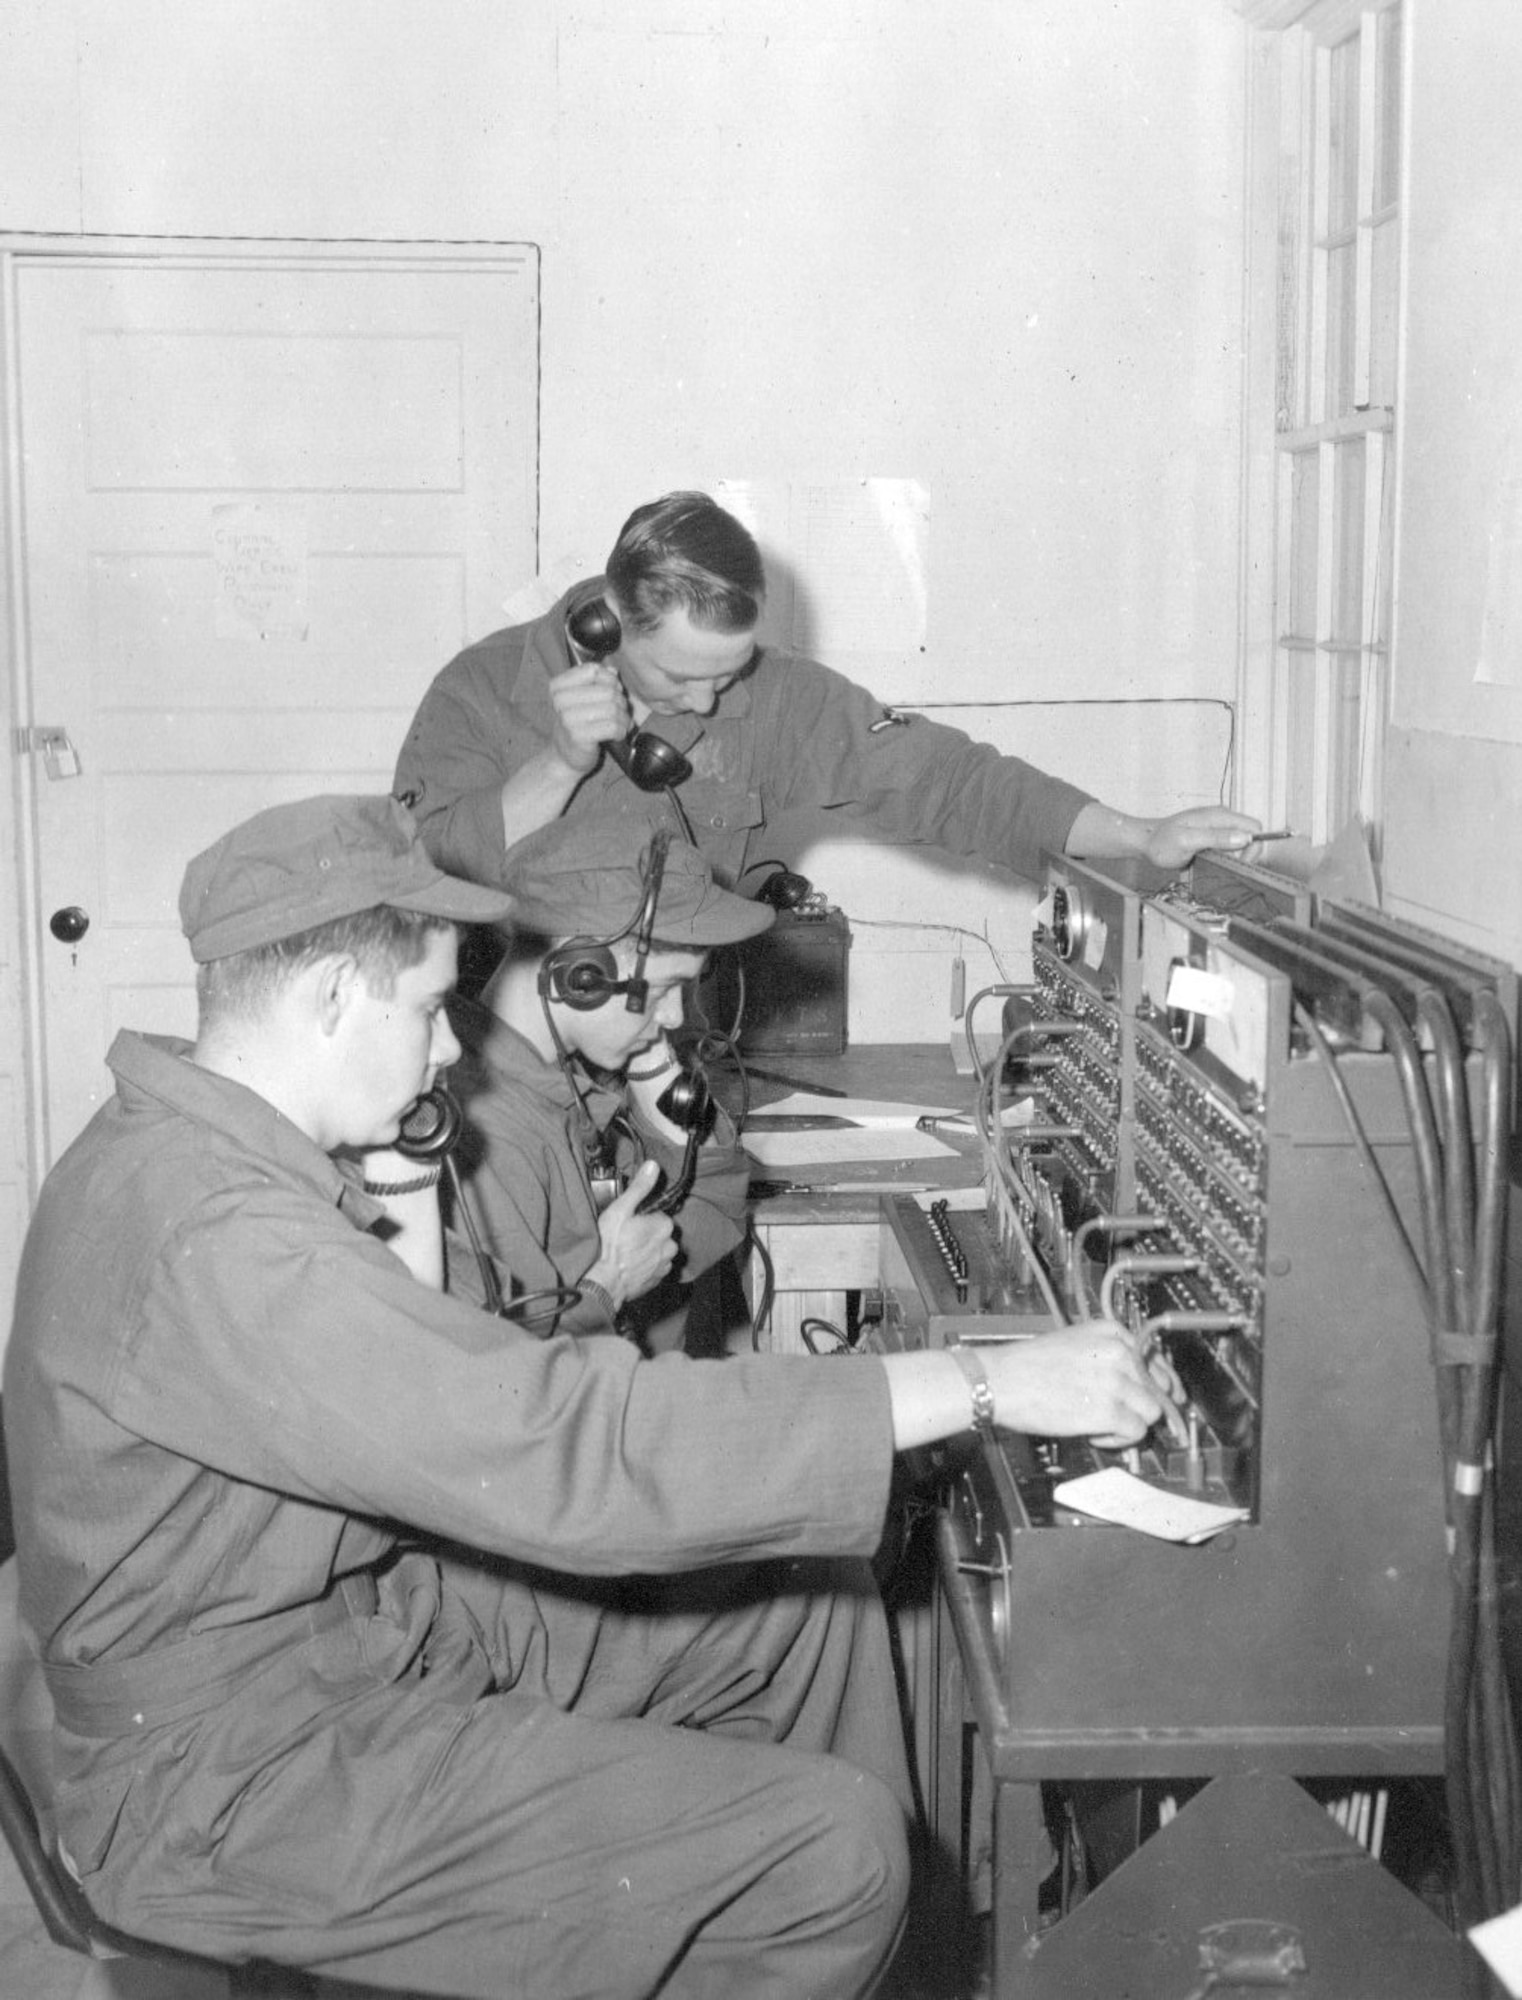 Airmen of the 142nd Communications Squadron operate a telephone switchboard during annual training at Gowen Field, June 17, 1954. (Courtesy 142FW History Archives)